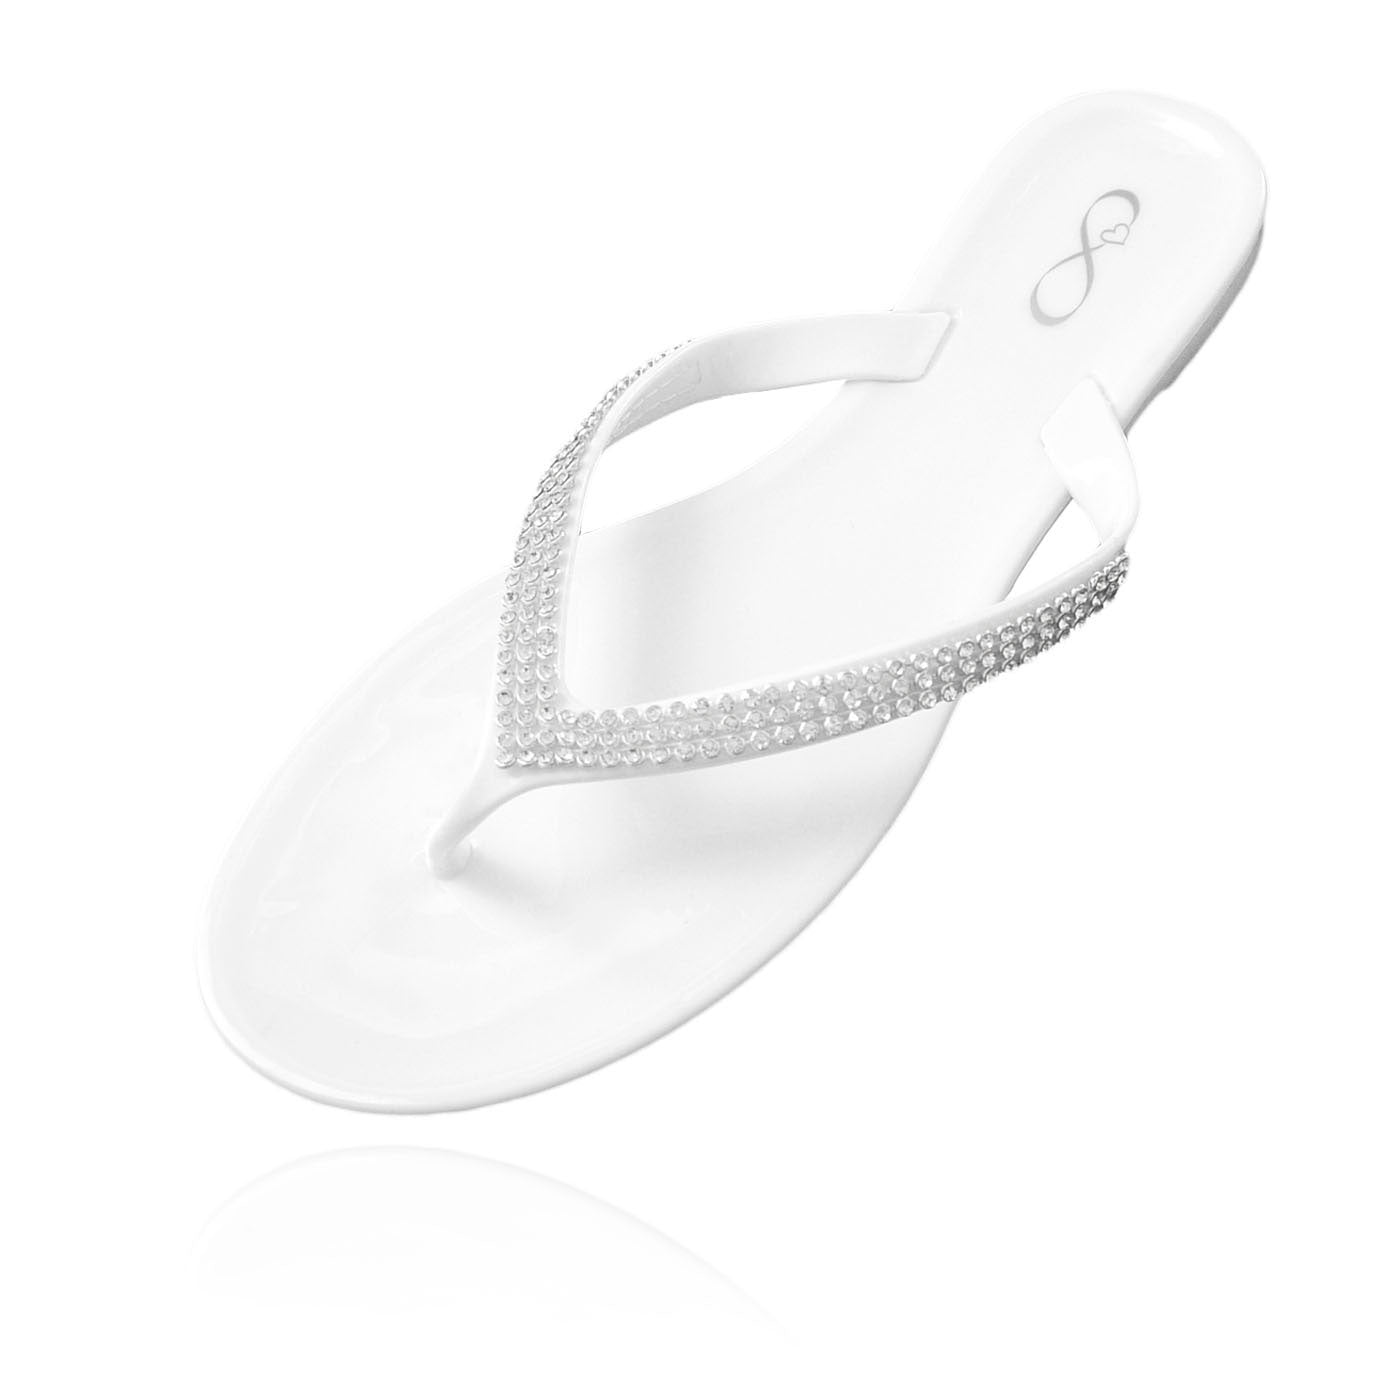 30 pairs of luxury diamante jelly flip flops in a personalized crate